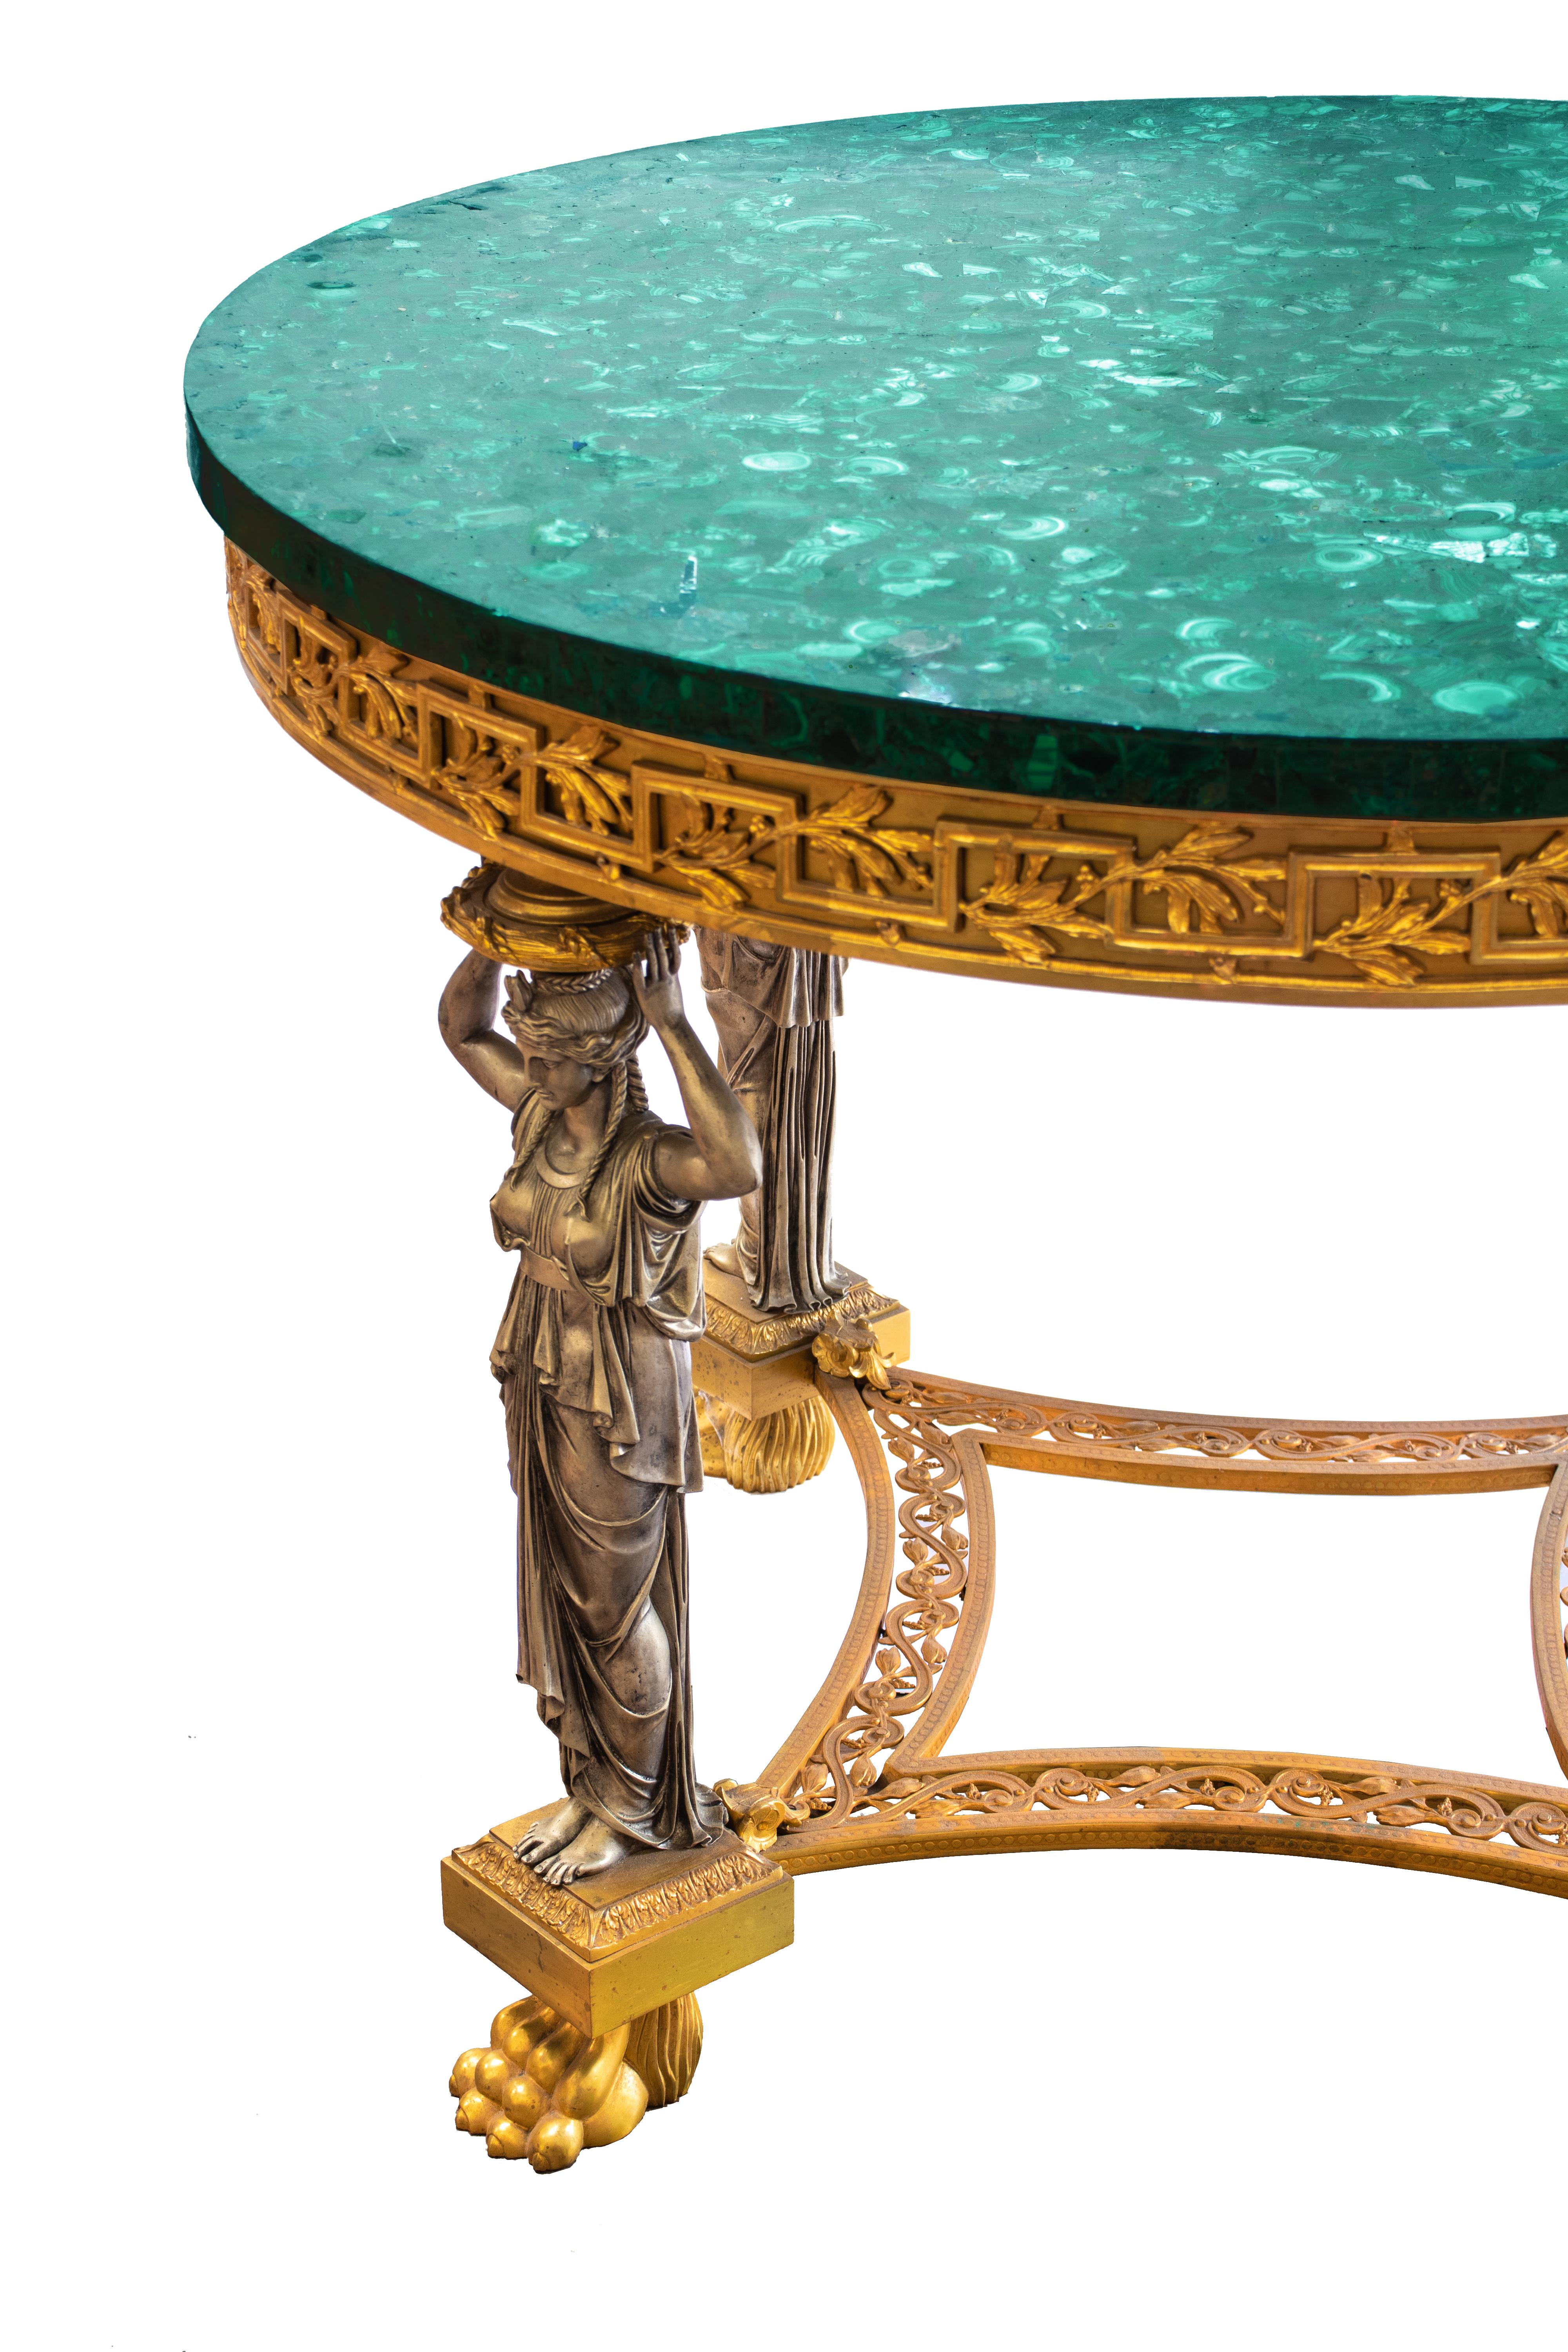 Round center table in Neoclassical style with a stunning malachite veneer tabletop. The base is made in silvered and gilt bronze, with four caryatids on claw feet bases, supporting a massive rim. The feet are connected by pierced curved plates,